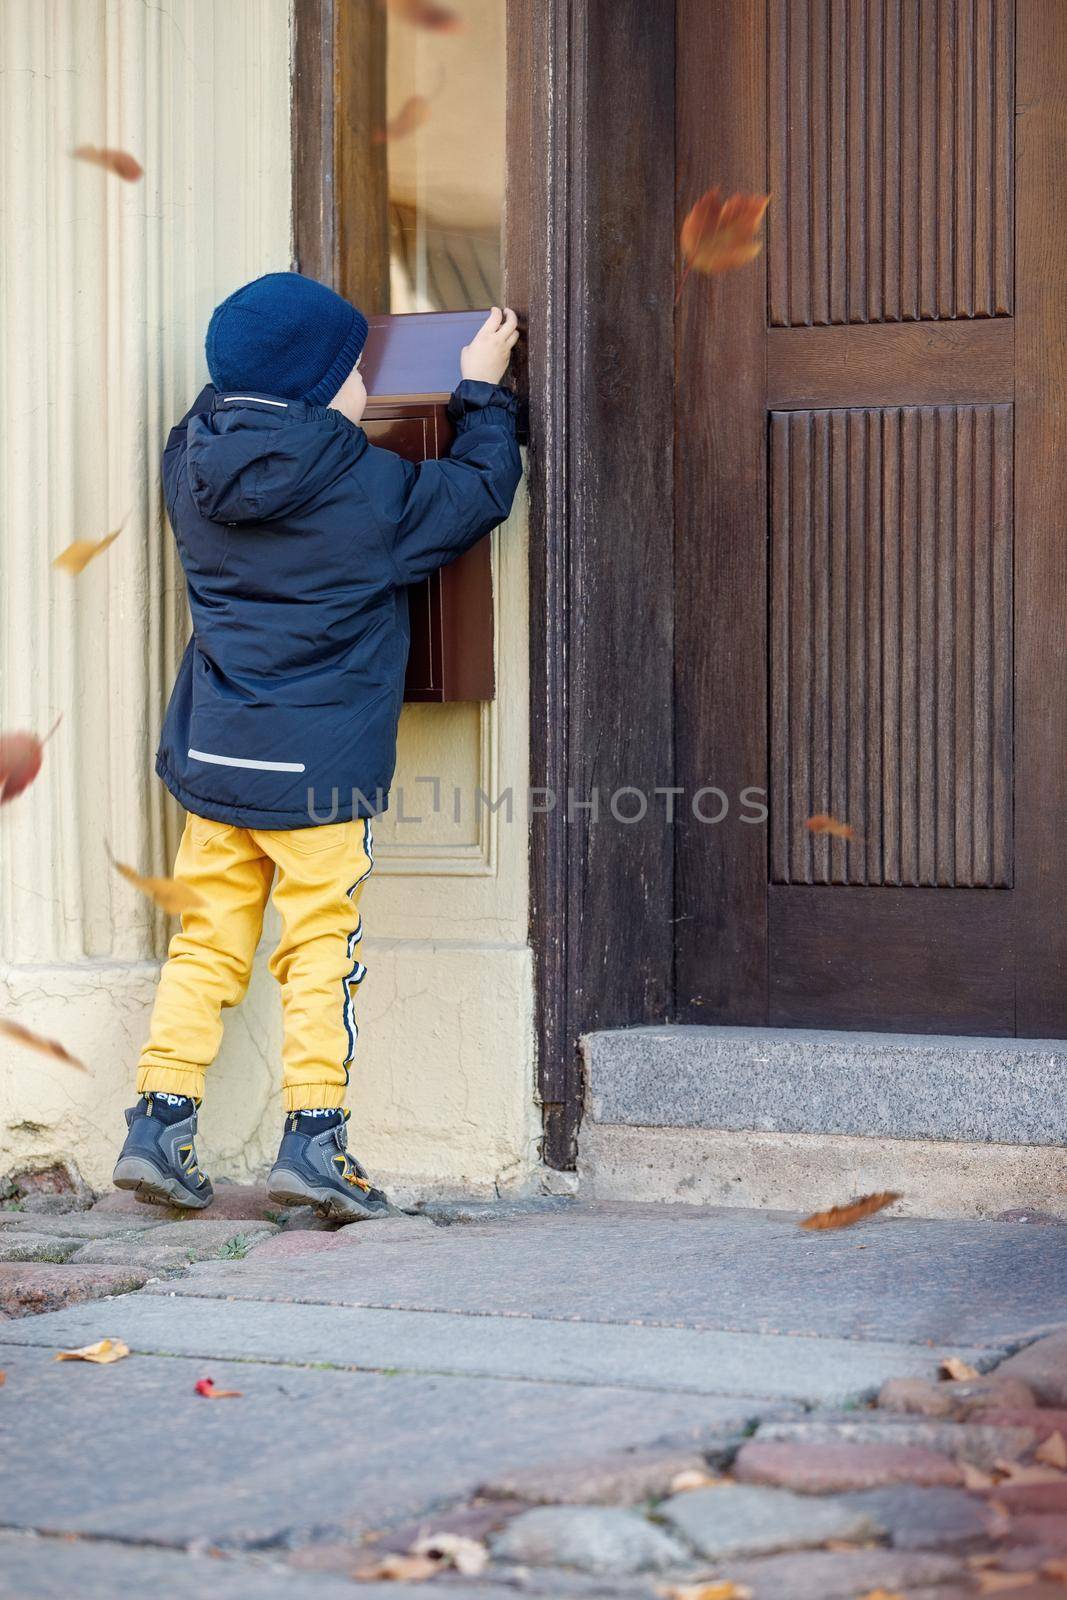 Little boy, checking the mail in outdoors mailbox. The kid is waiting for the letter, checks the correspondence and looks into the metal mailbox. Falling leaves during the autumn season.